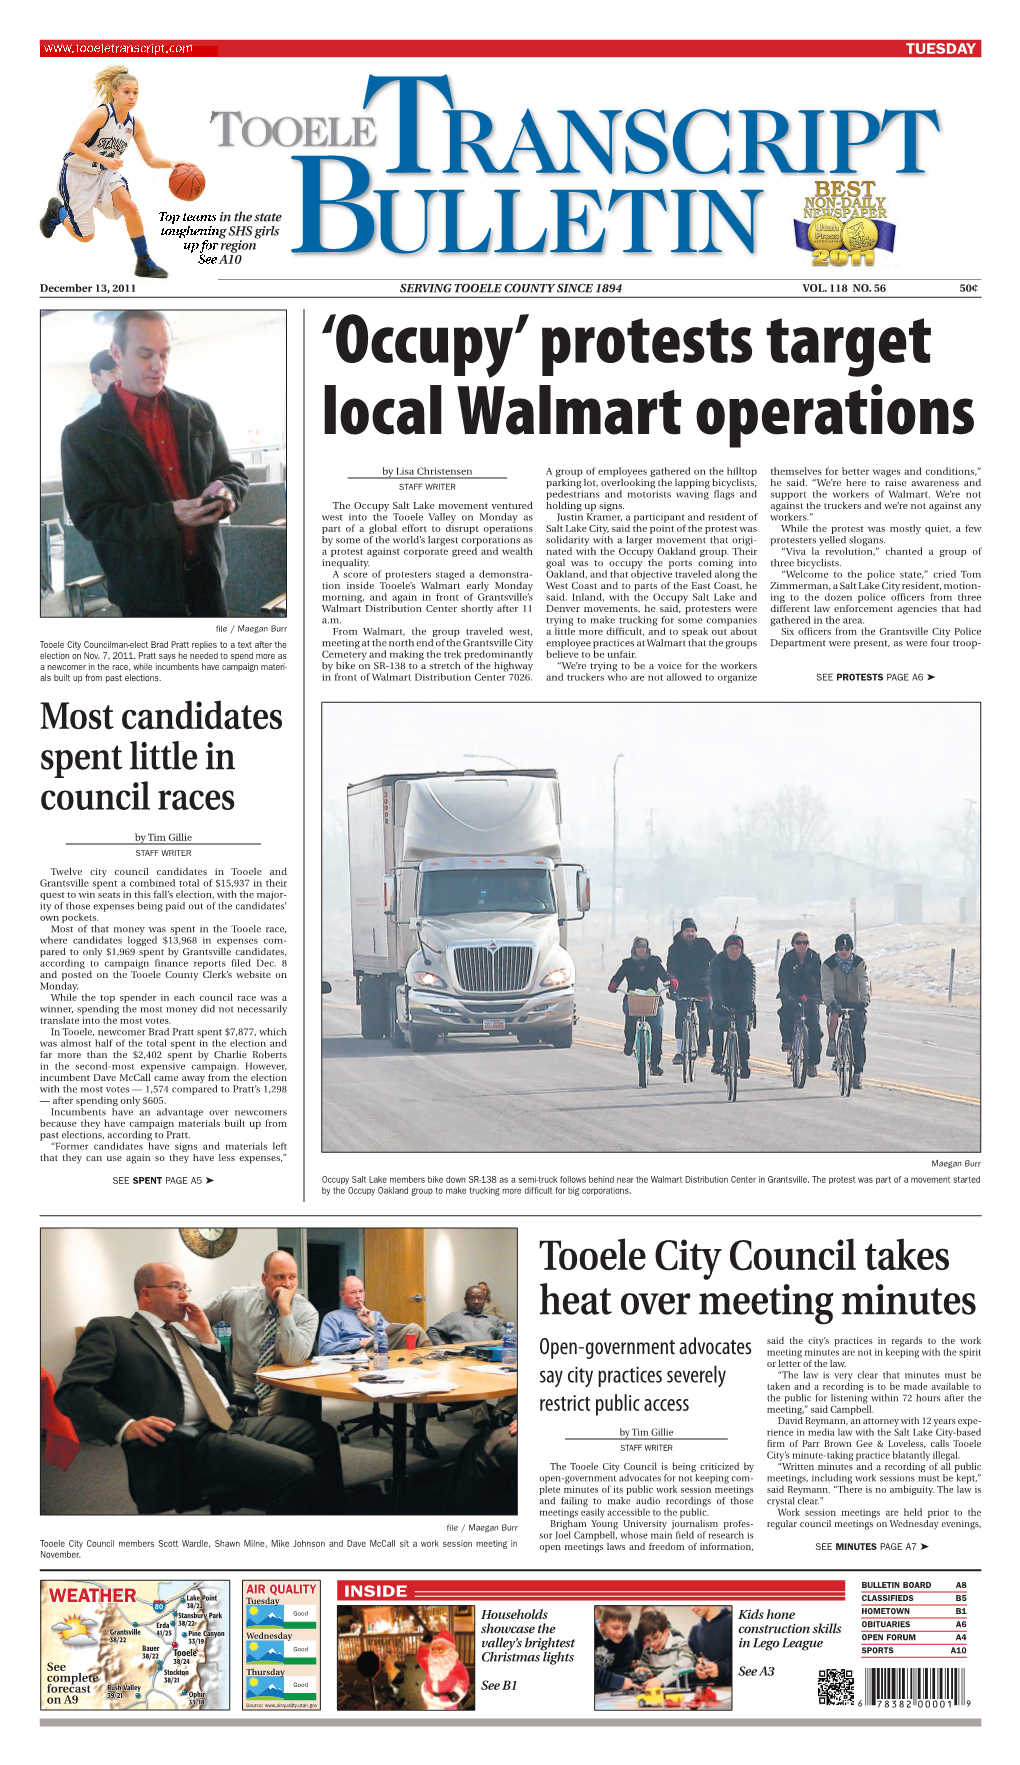 Protests Target Local Walmart Operations